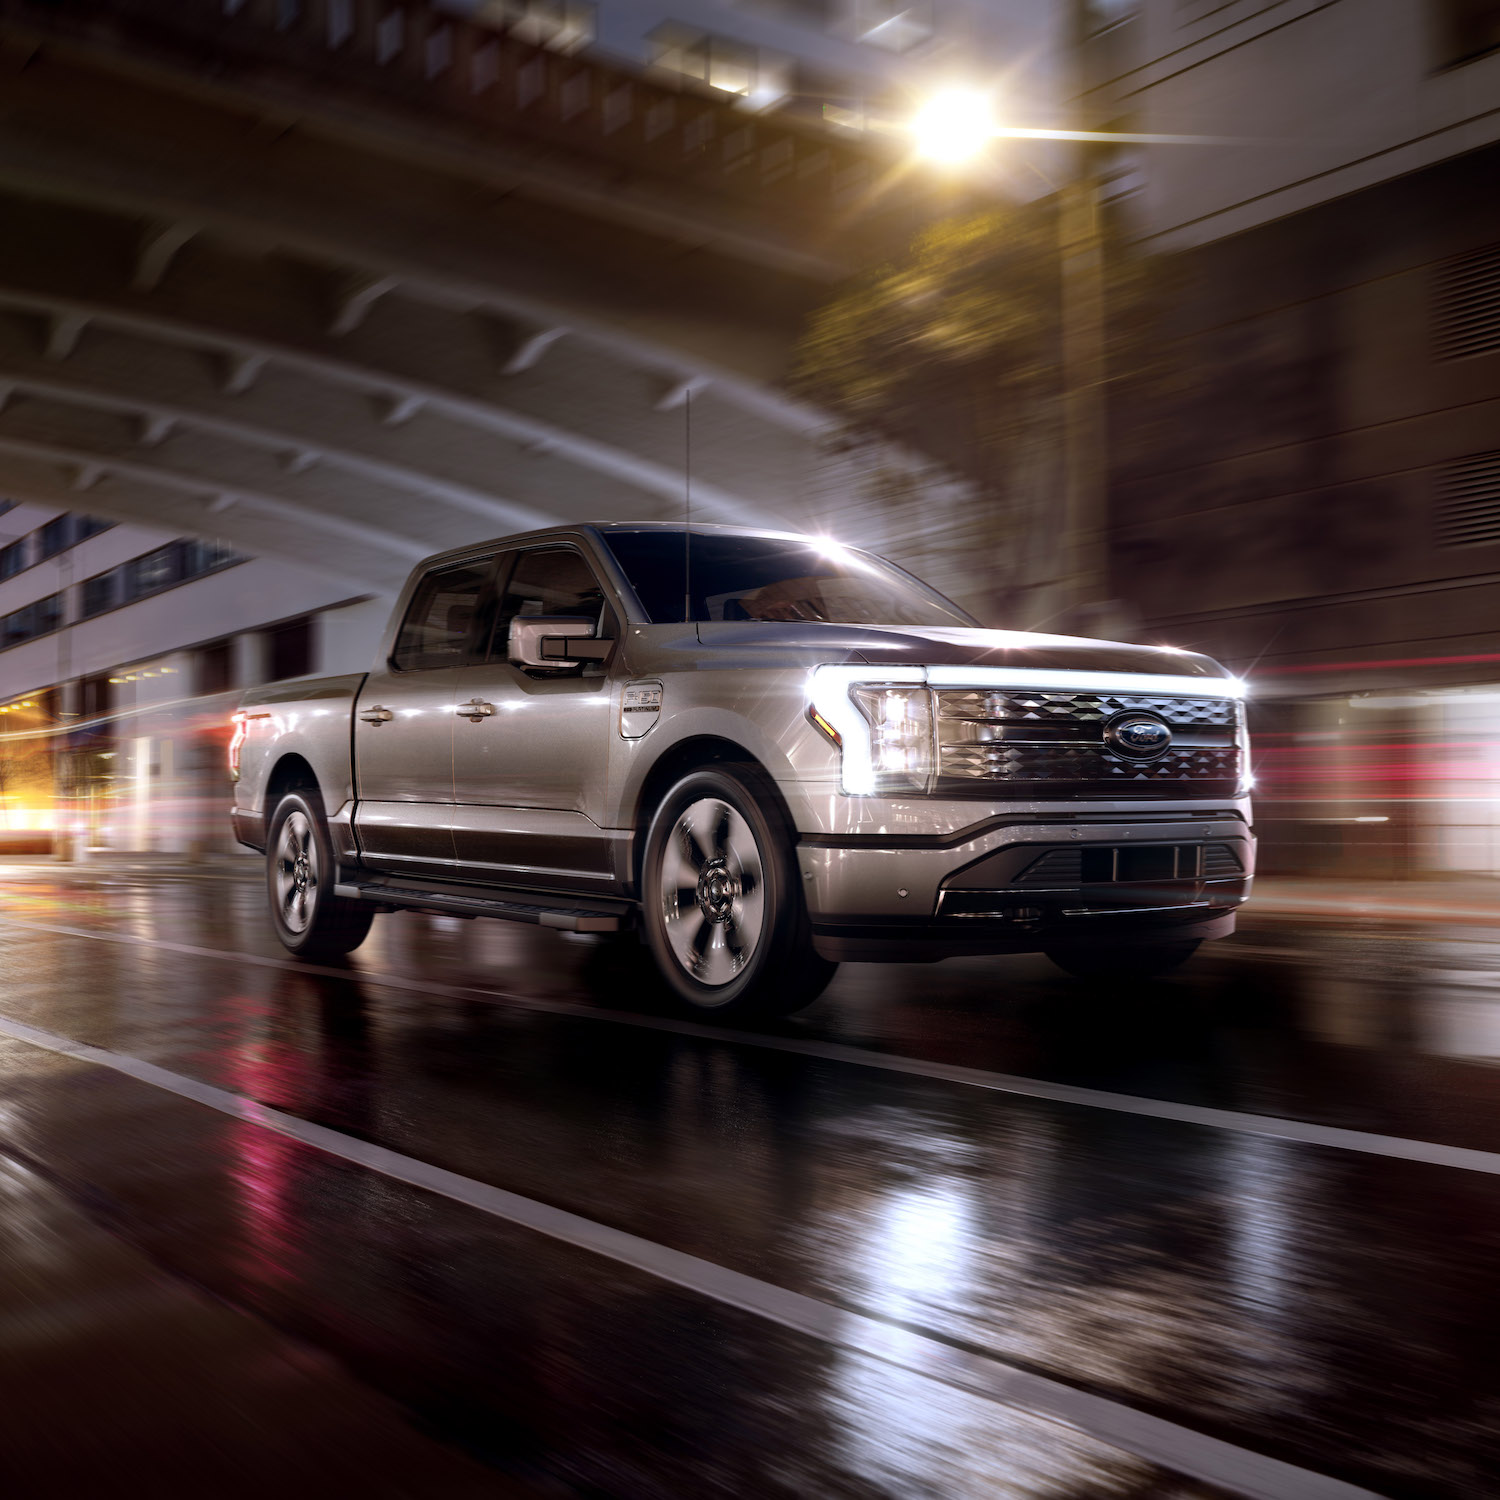 2022 Ford F-150 Lightning electric pickup truck price msrp